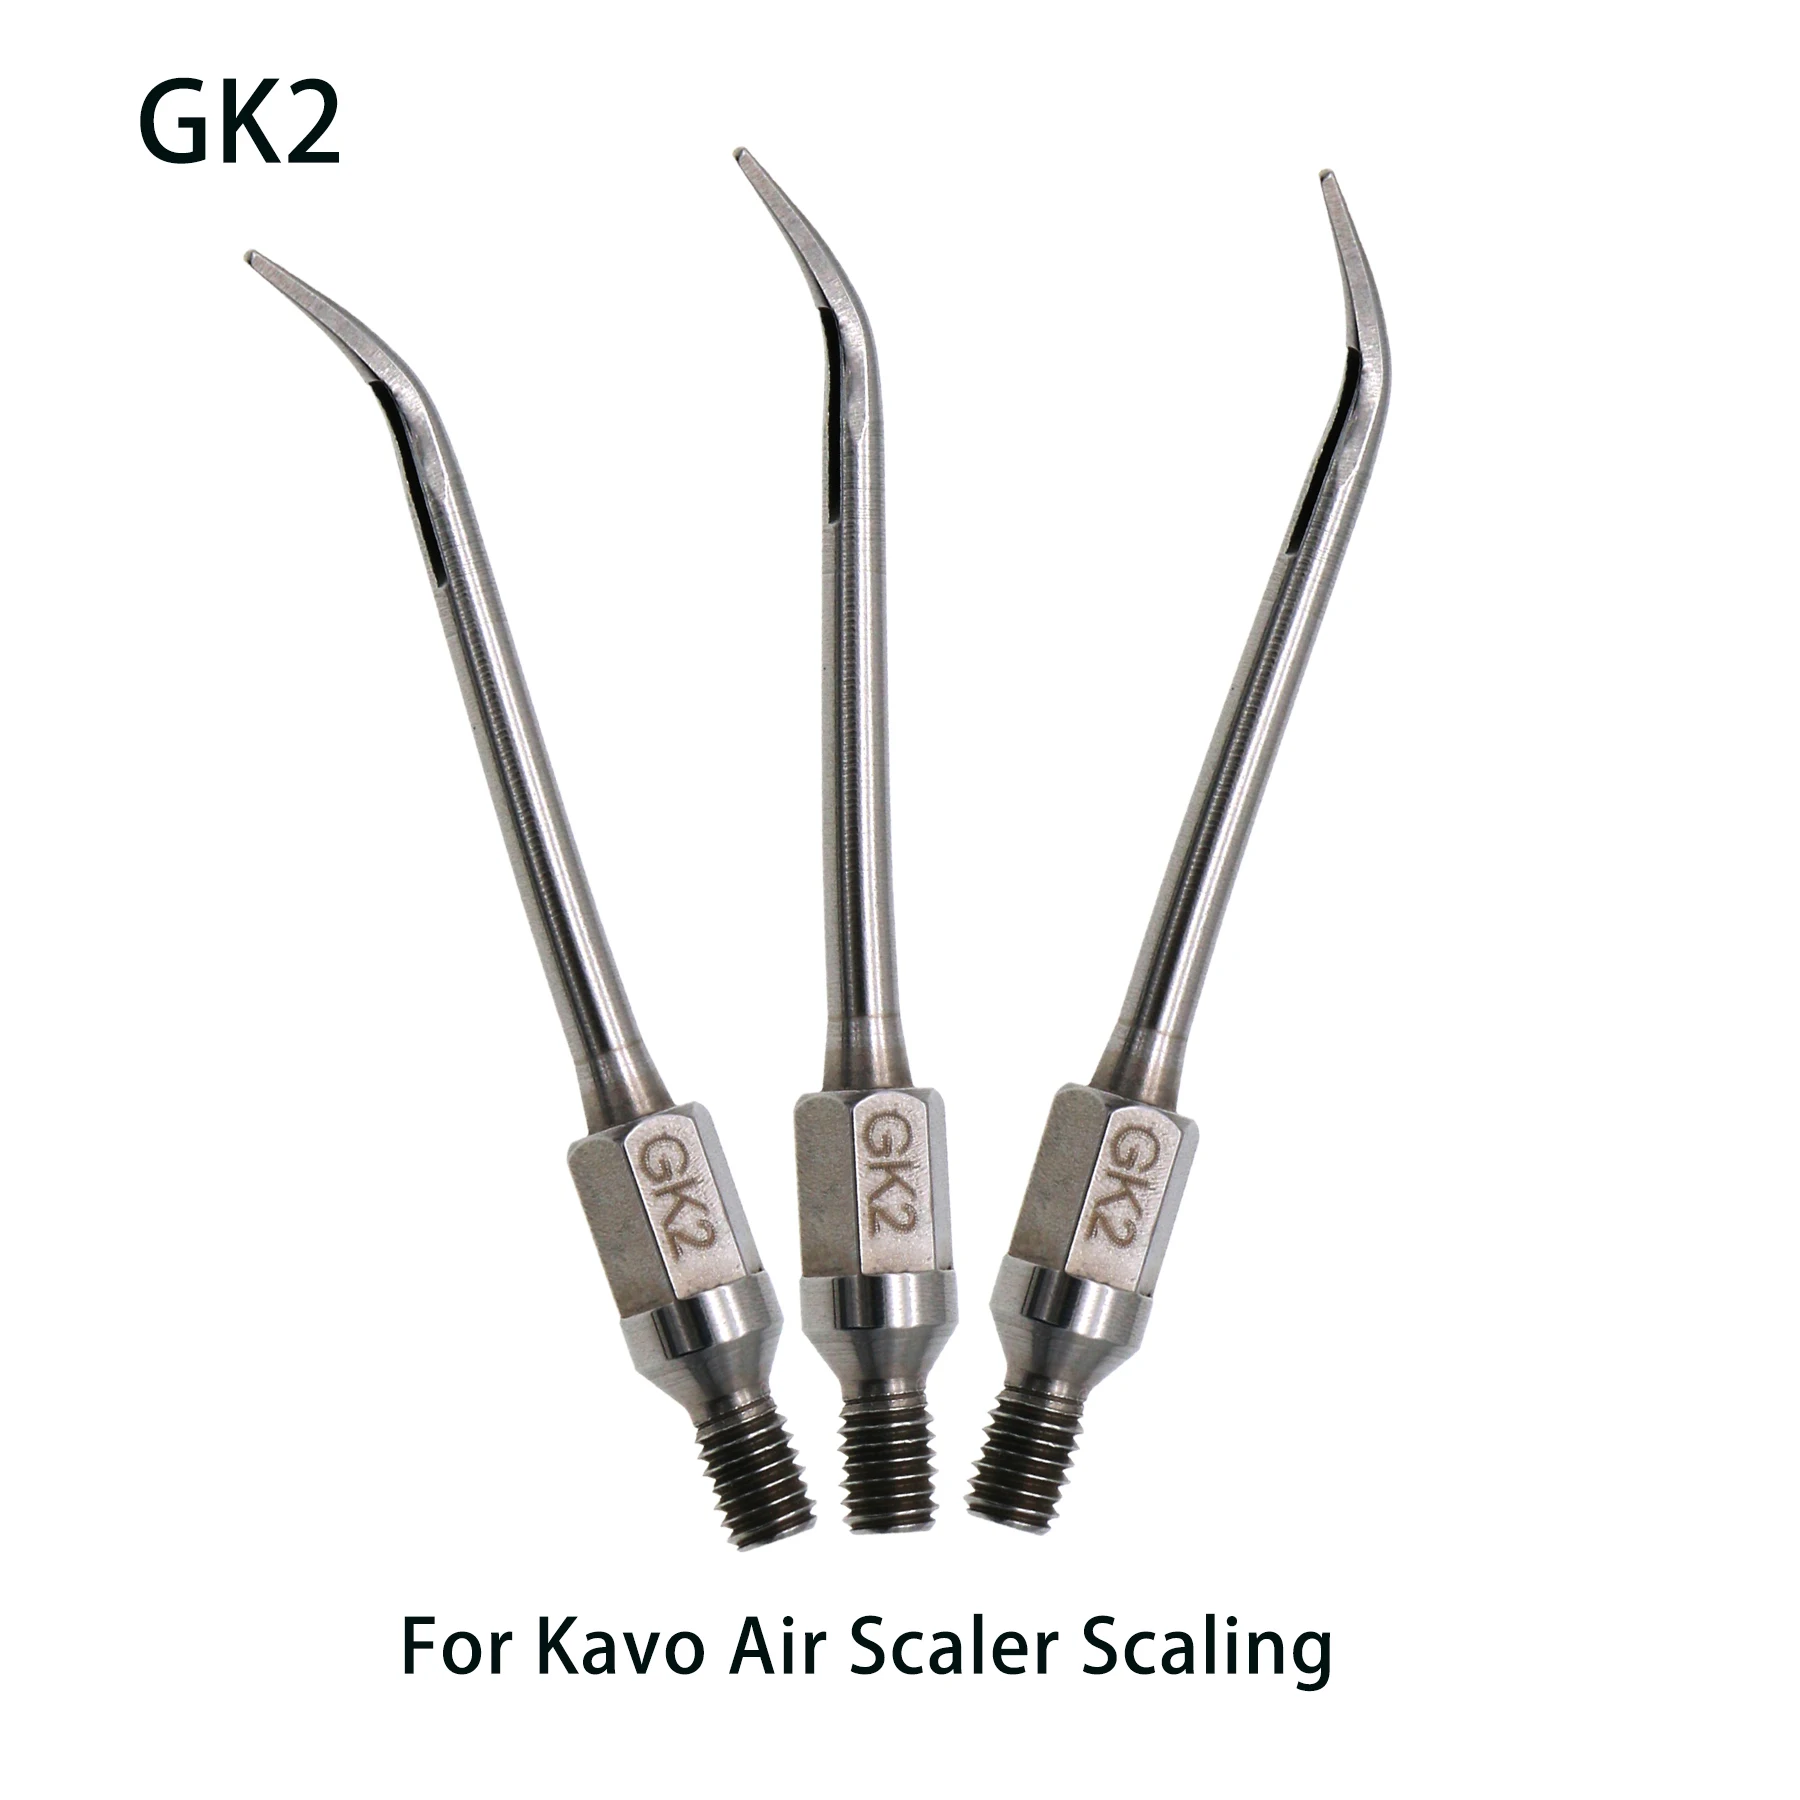 SEUJJRO GK2 Dental Ultrasonic Air Scaler Tips Fit For KAVO Sonicflex Scaling Piezo Handpiece Dentistry Tooth Calculus Remover